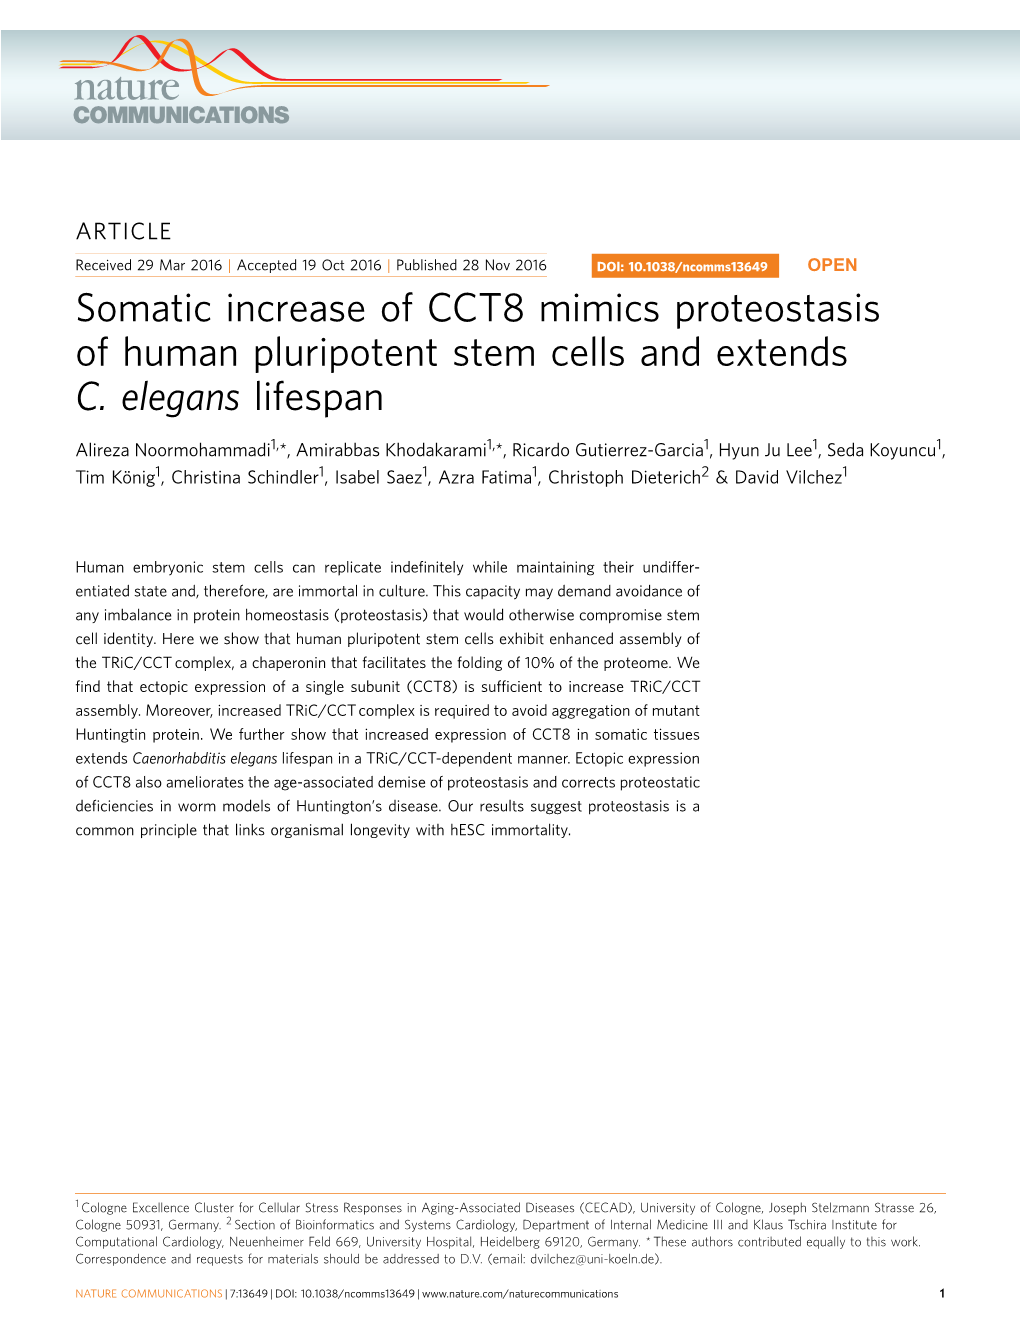 Somatic Increase of CCT8 Mimics Proteostasis of Human Pluripotent Stem Cells and Extends C. Elegans Lifespan